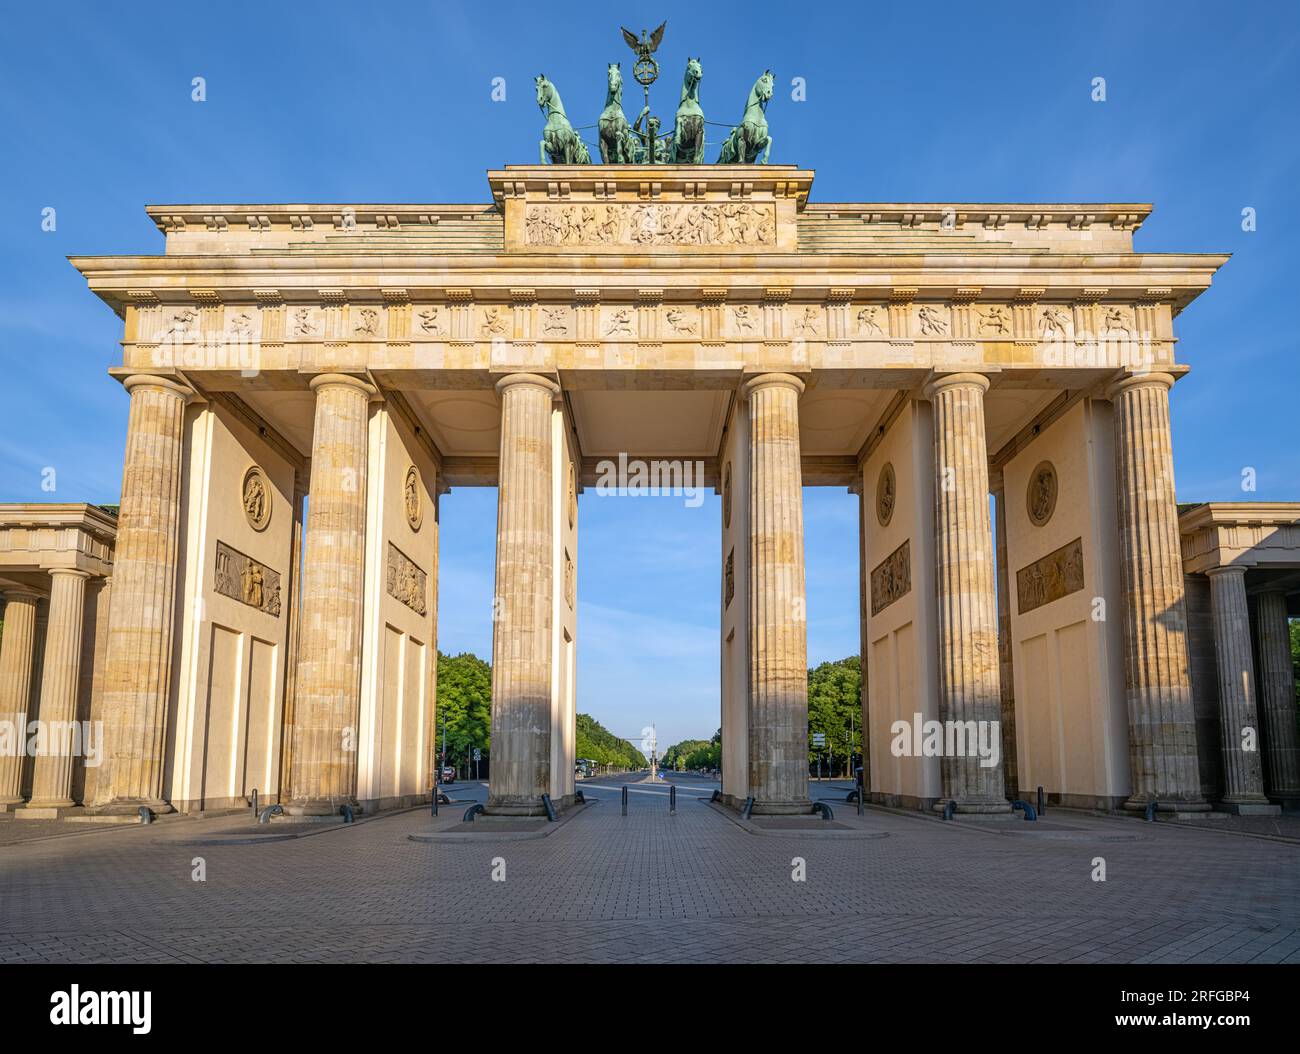 High resolution image of the famous Brandenburger Tor in Berlin, Germany Stock Photo